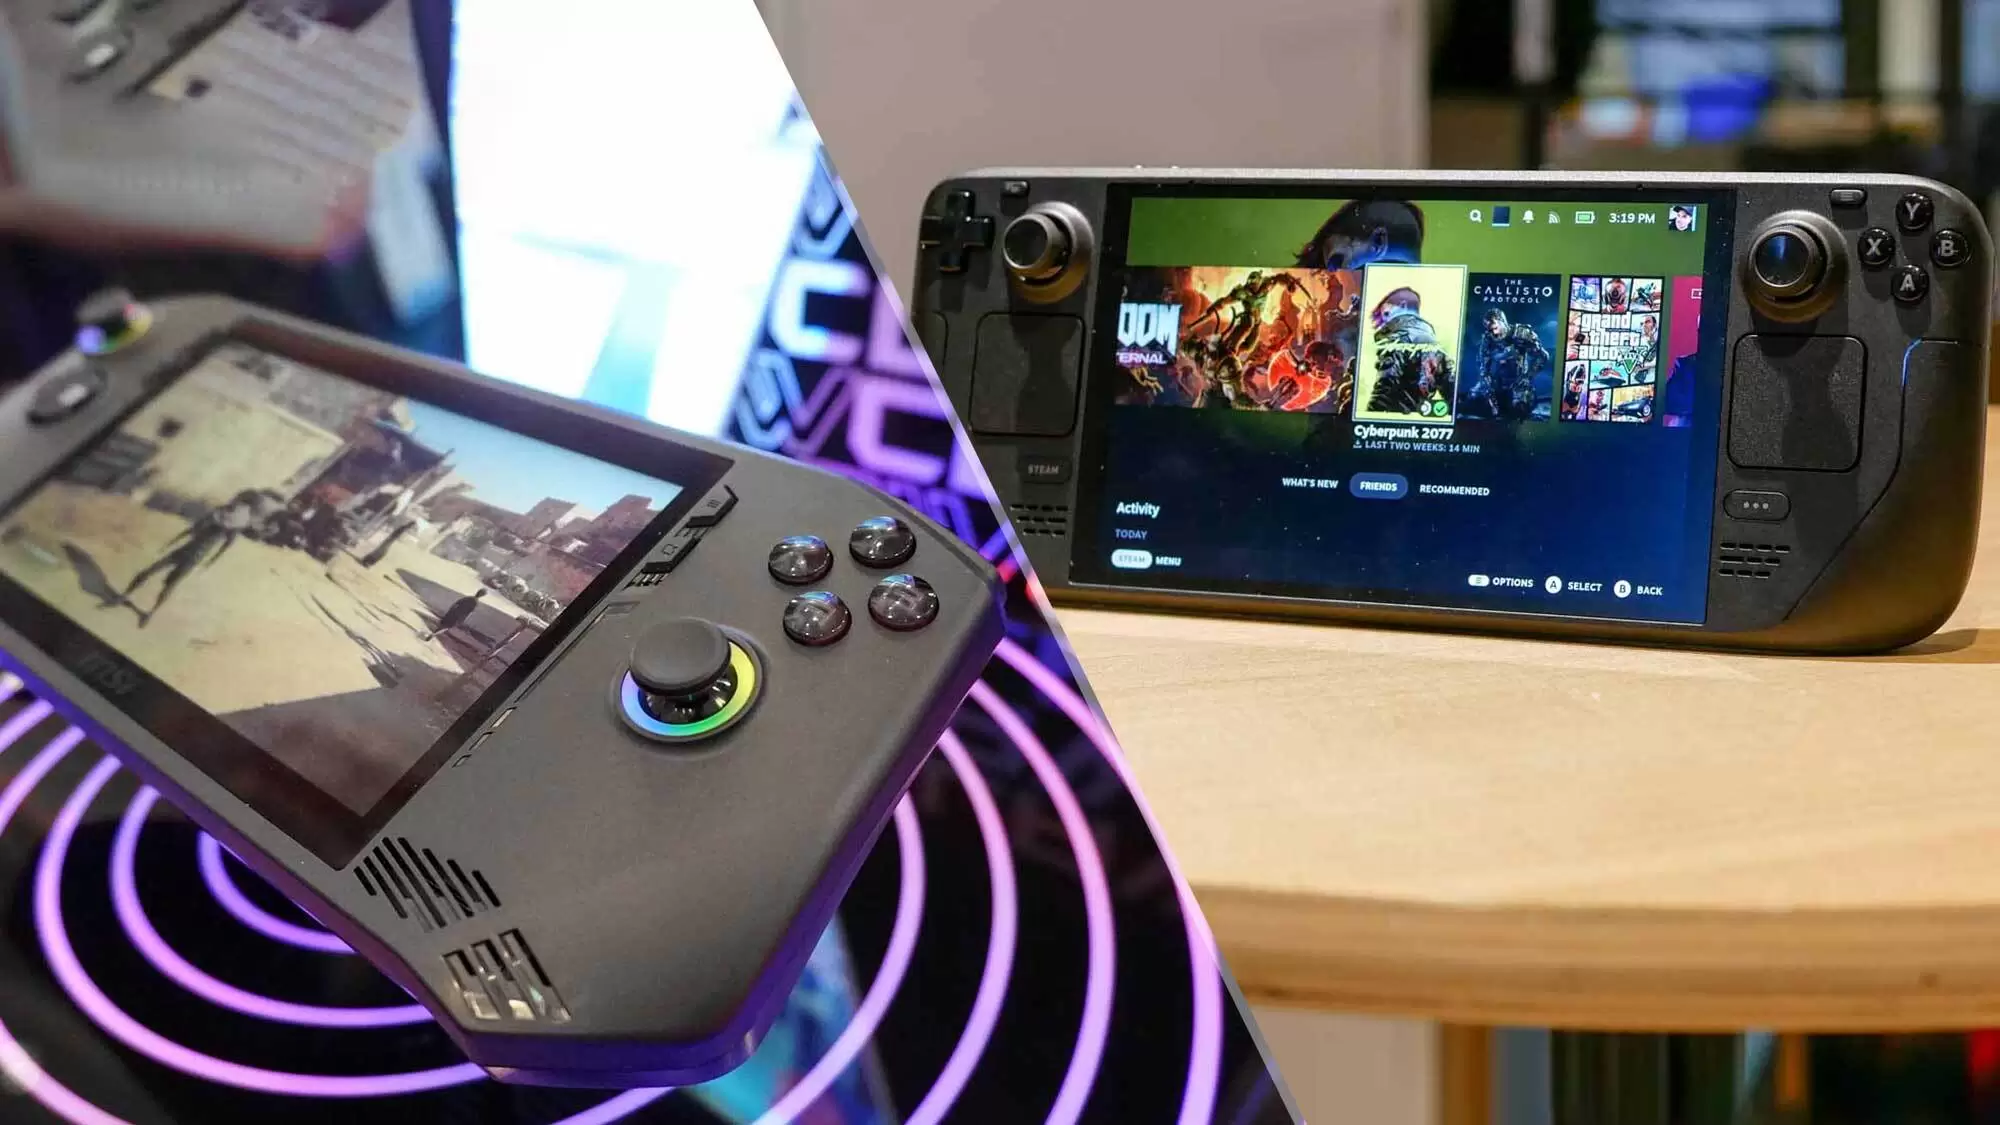 MSI Claw vs Steam Deck OLED: Which gaming handheld could win?